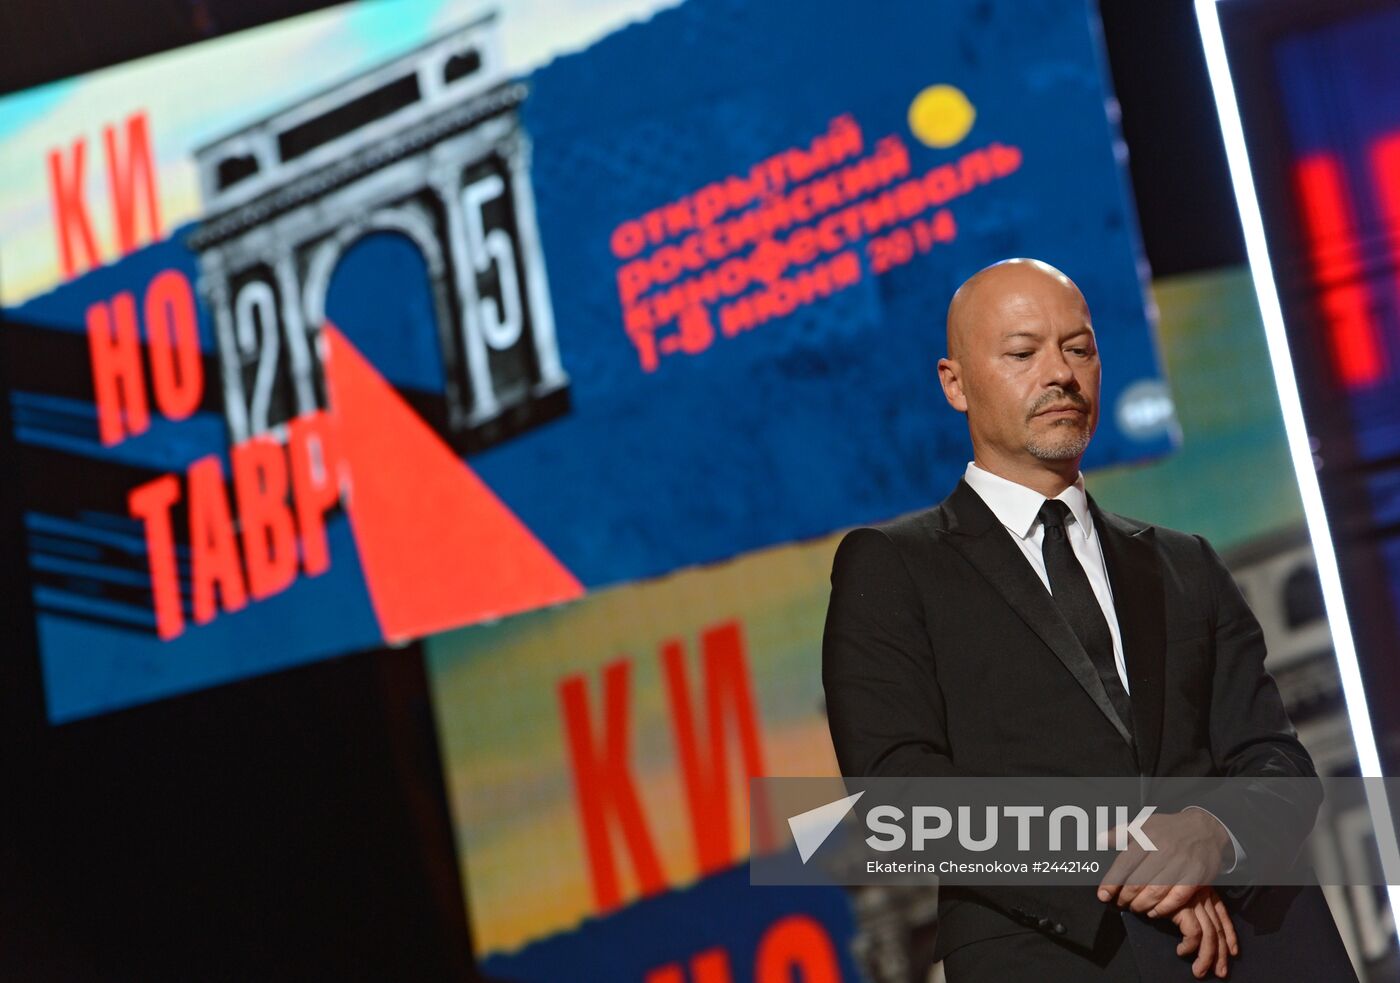 25th "Kinotavr" Open Russian Film Festival. Day One